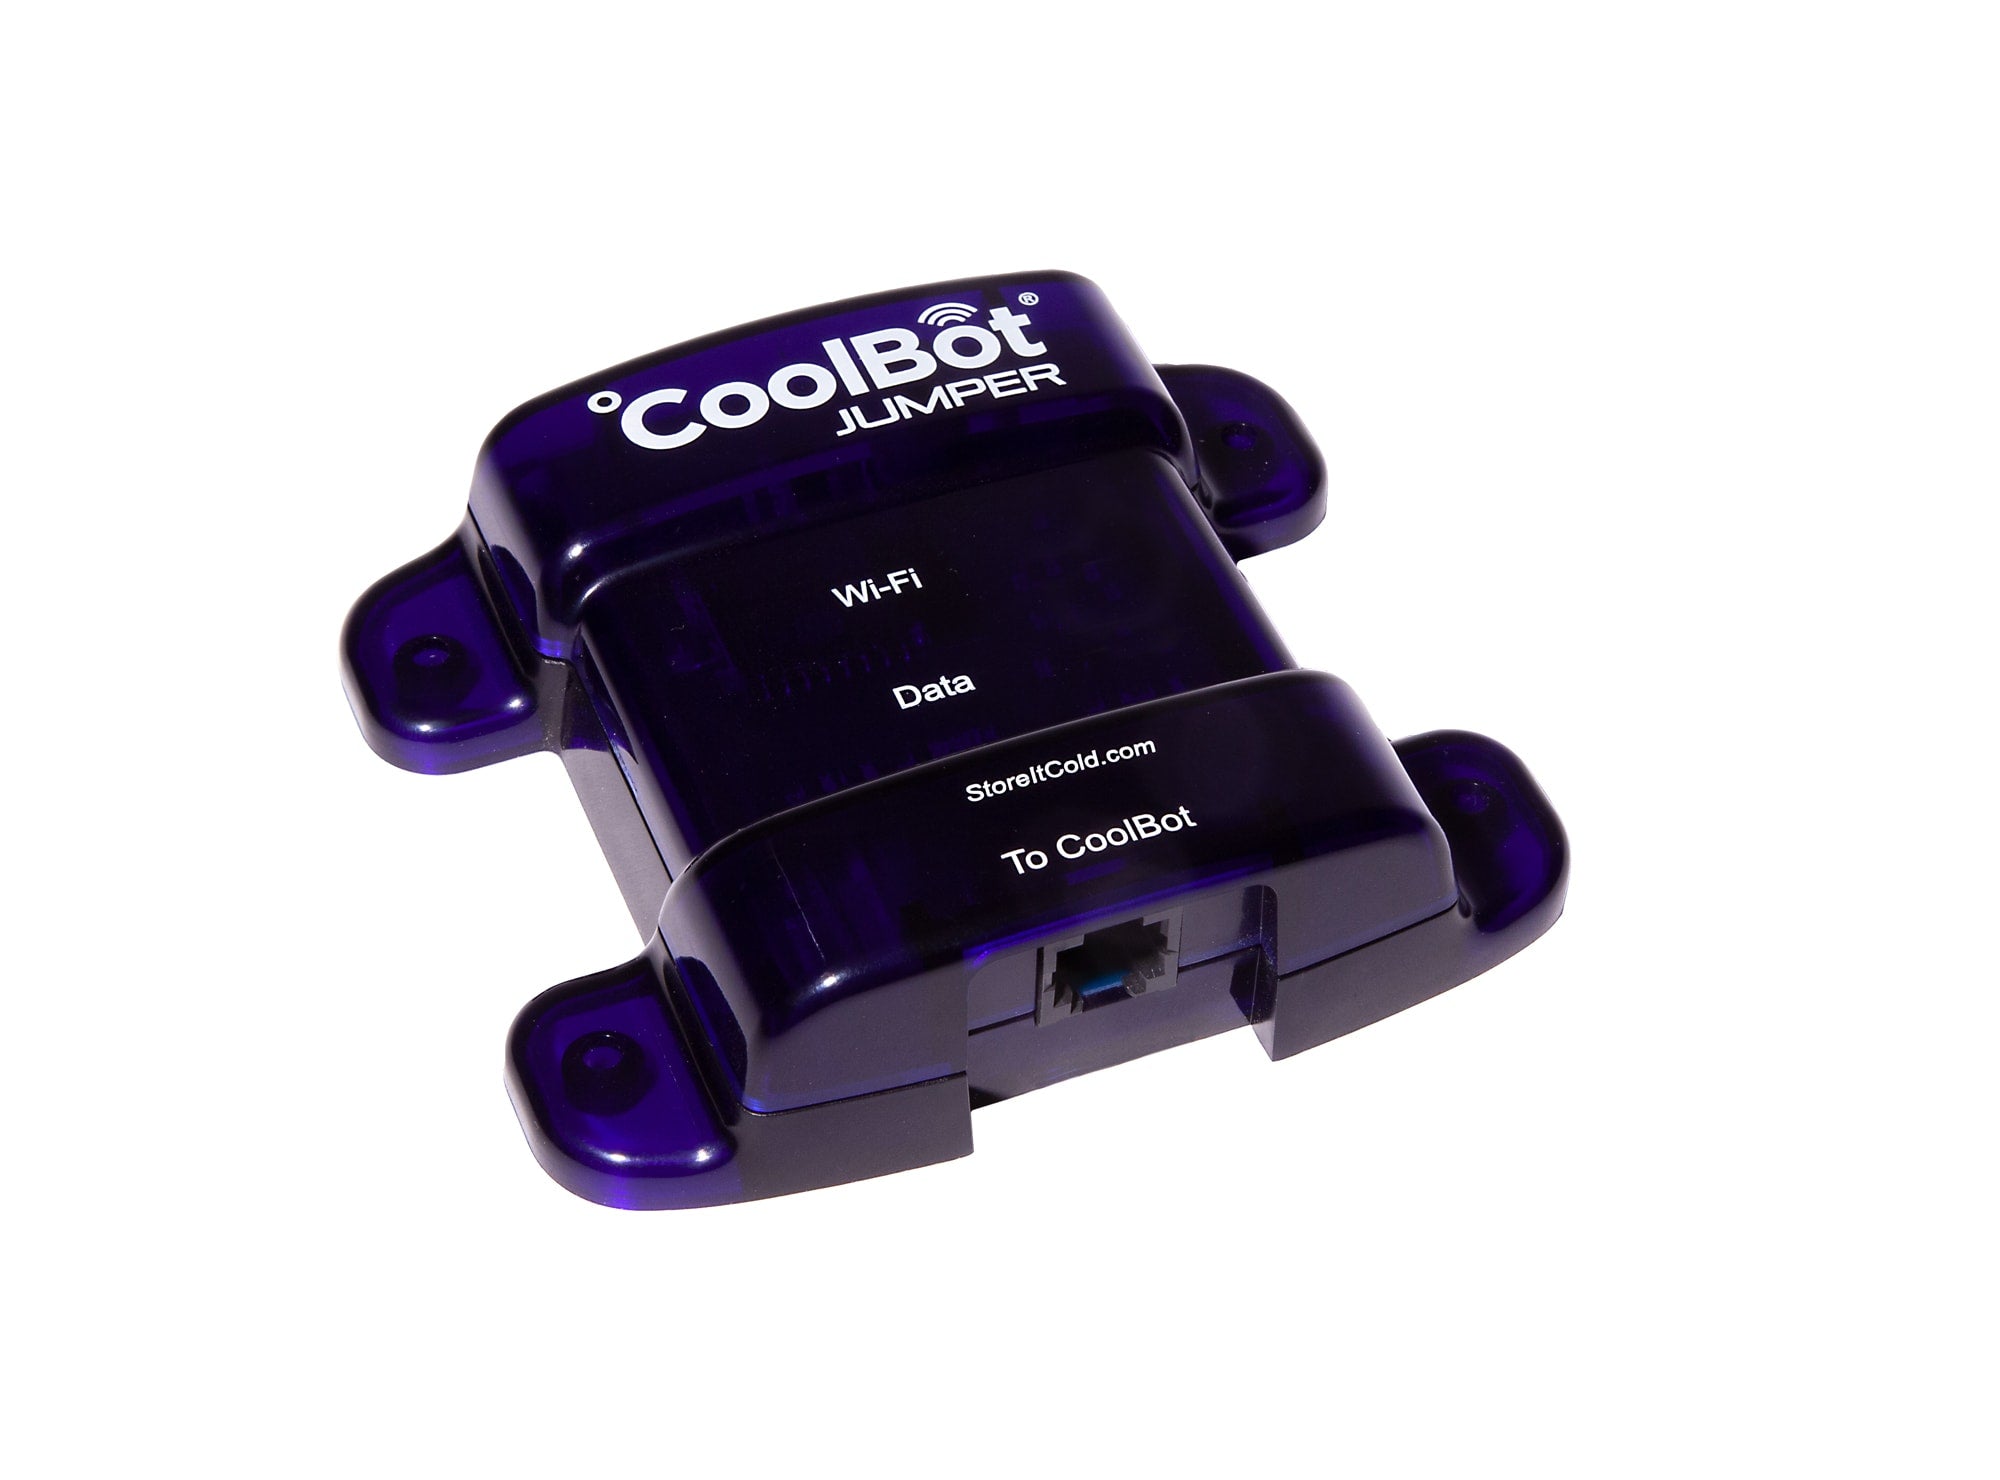 NEW WiFi Enabled CoolBot Pro Walk-In Cooler Controller (3630456438864)